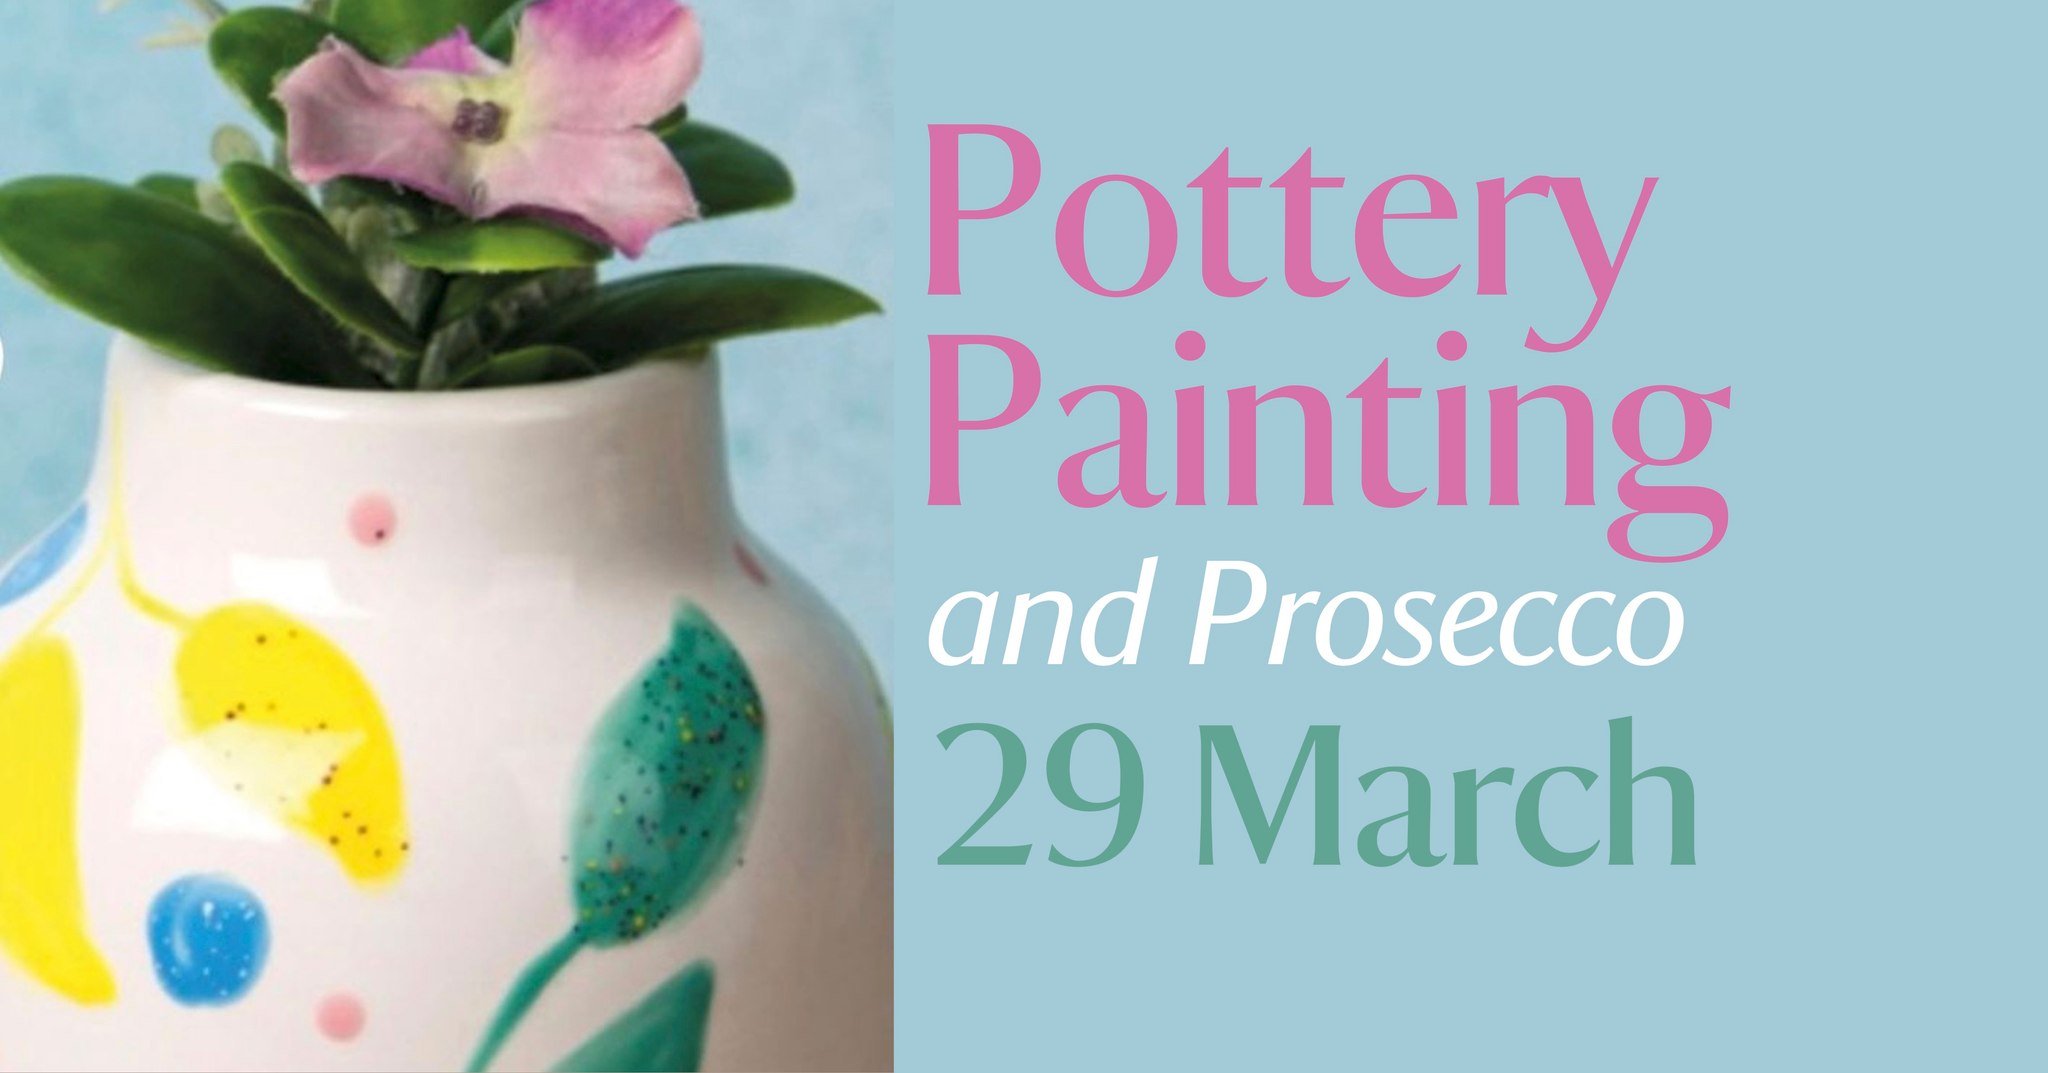 Pottery Painting and Prosecco